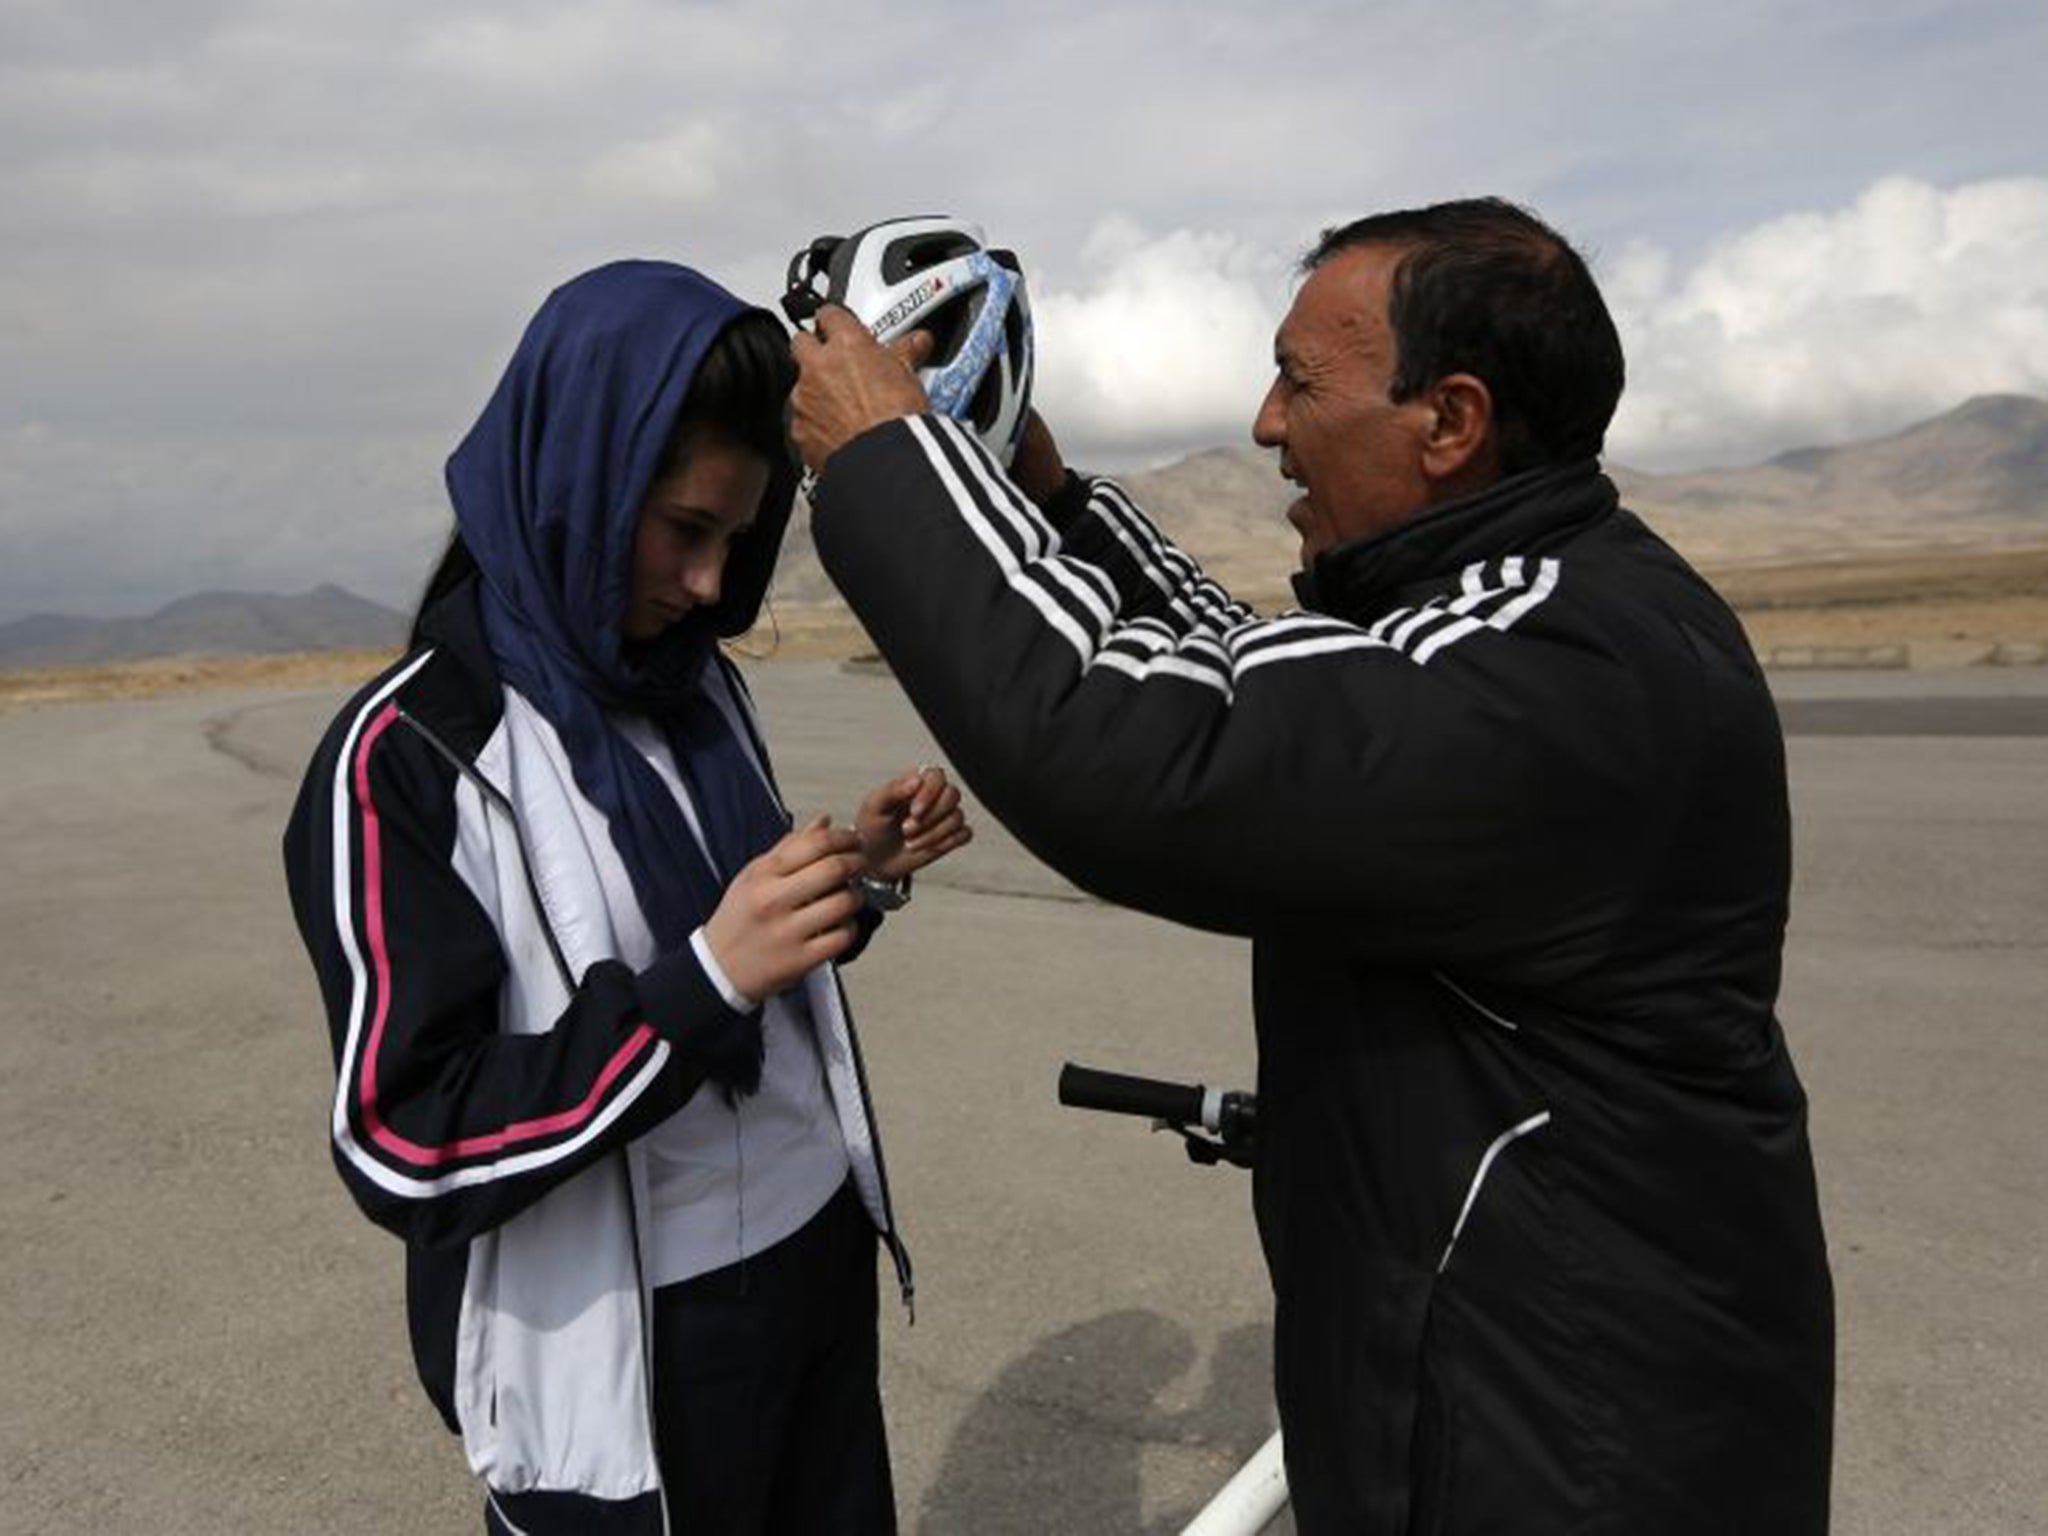 Malika Yousufi, of the Afghanistan's Women's National Cycling Team is helped into her helmet by her coach, Abdul Sadiq Sadiqi, during training on the outskirts of Kabul